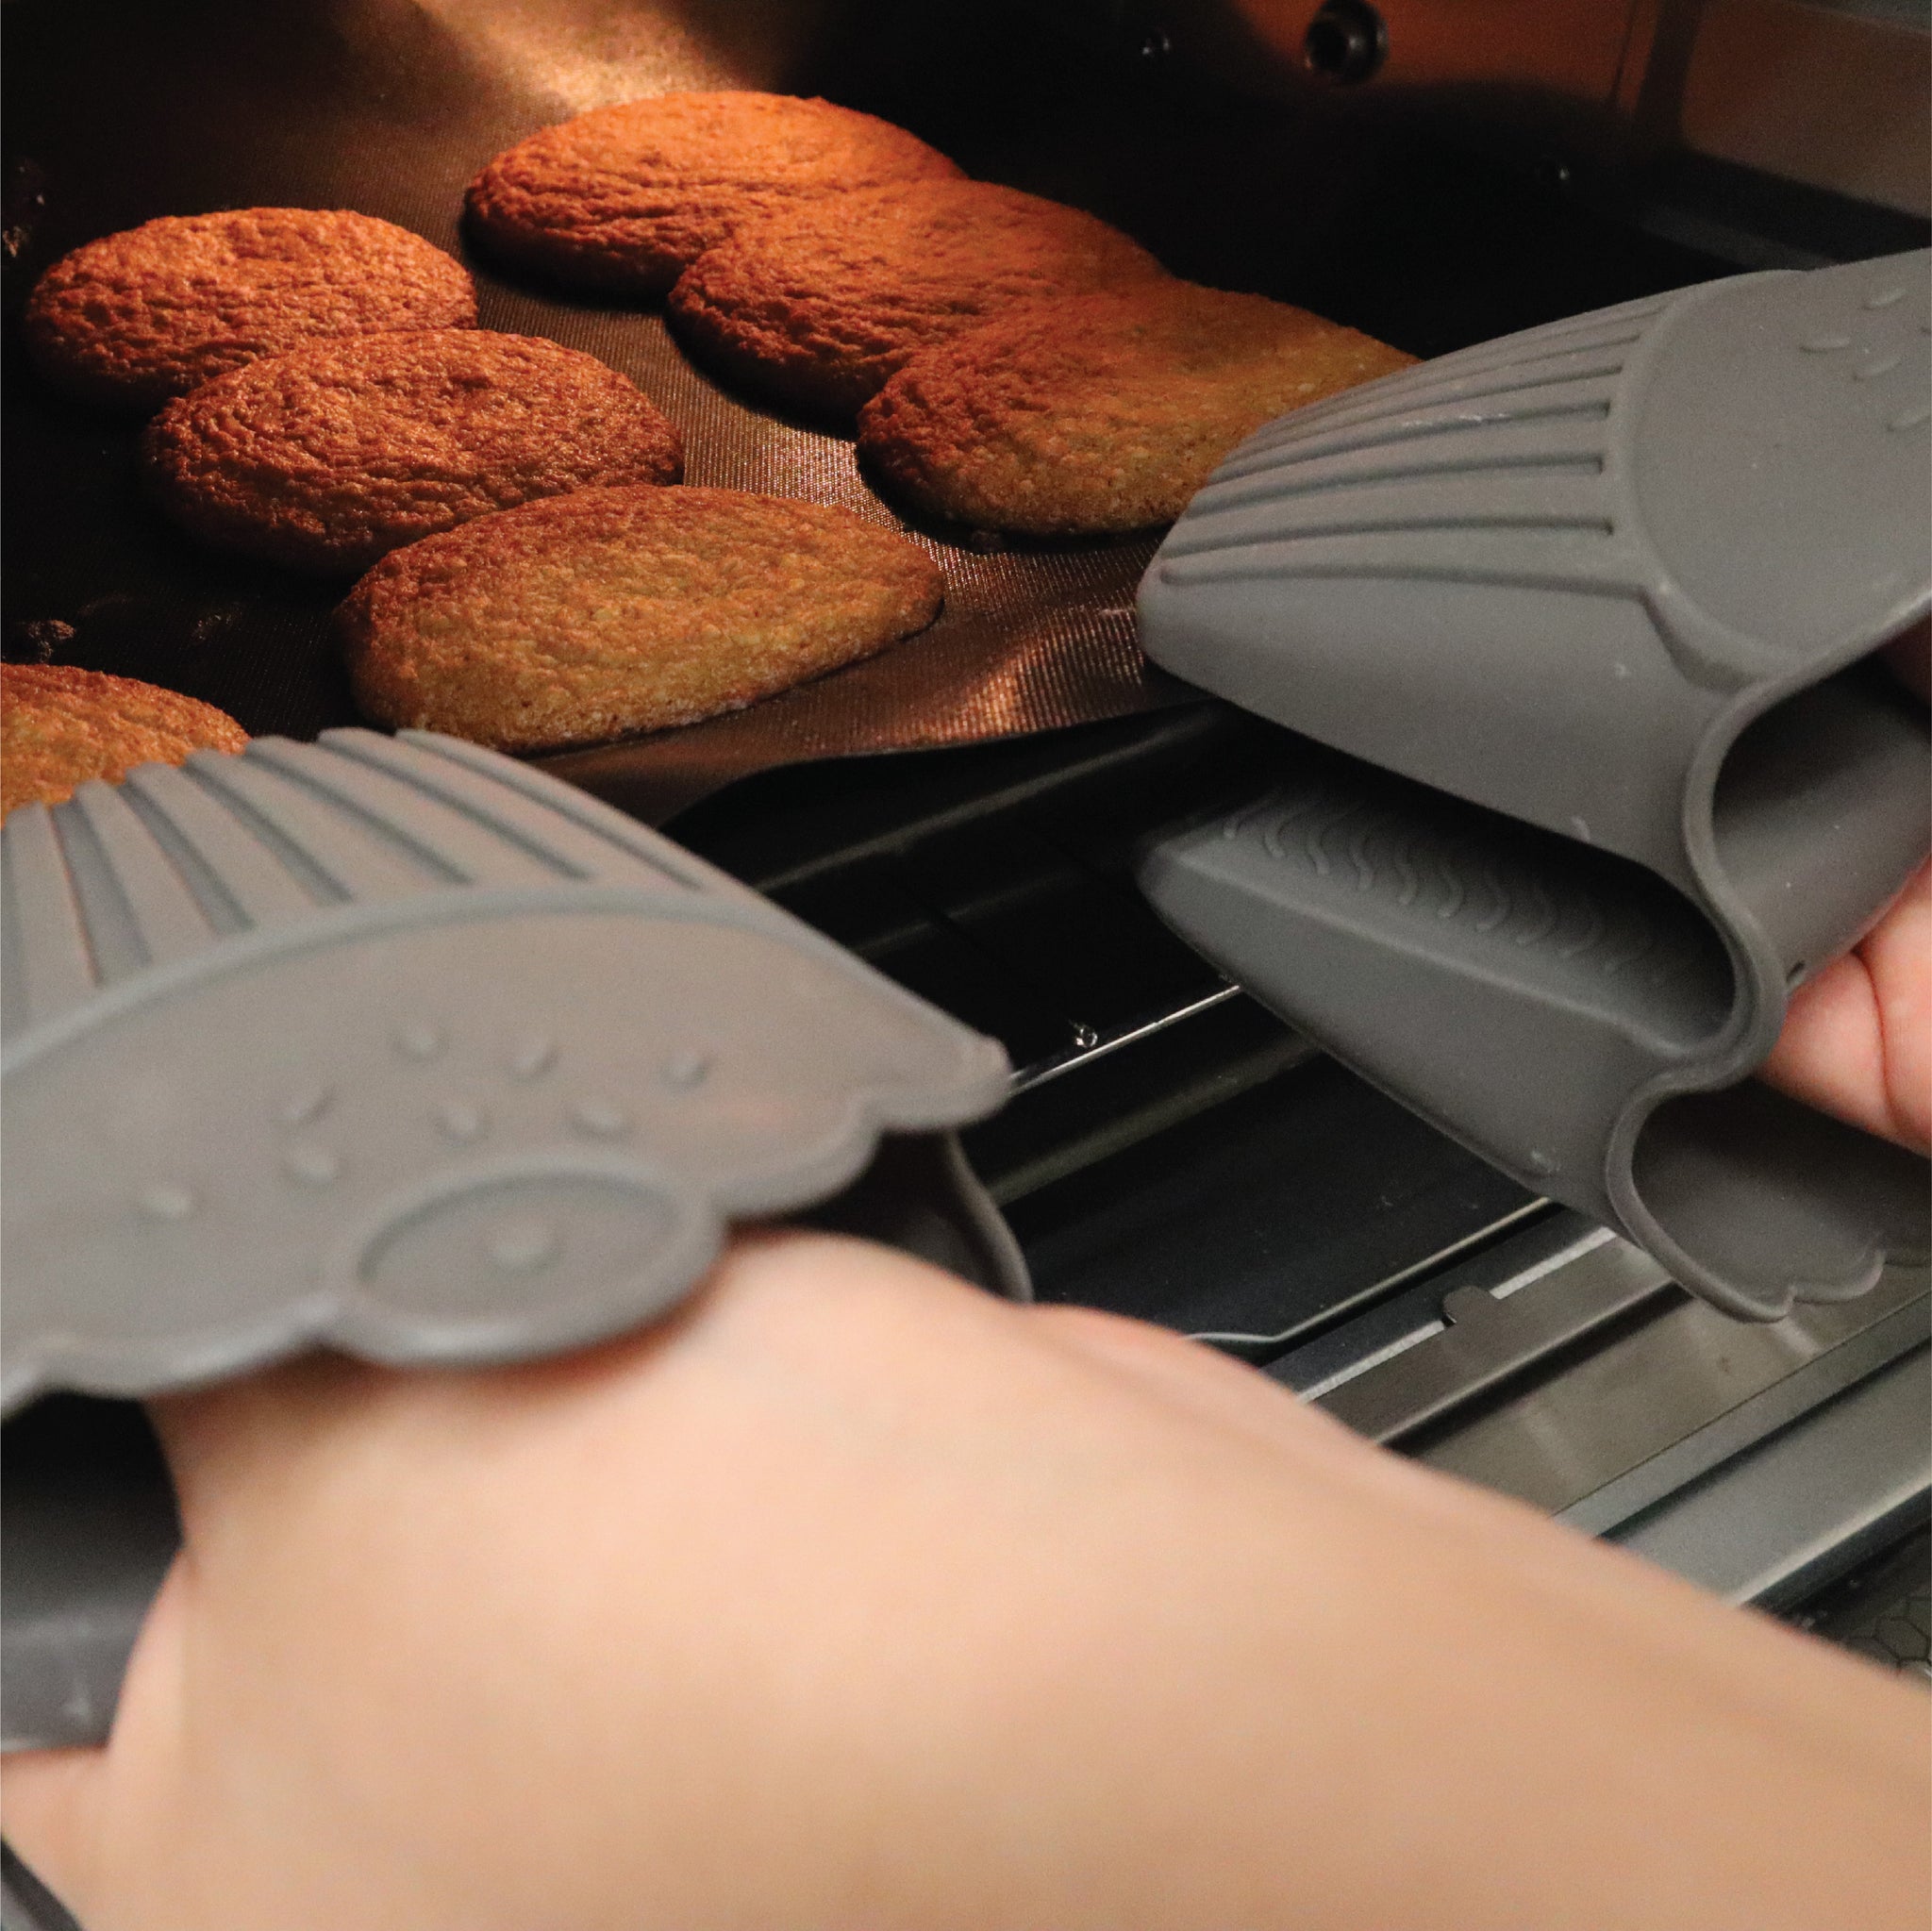 Silicone Oven Mitts Are a Secret Hack for Opening Stubborn Jars